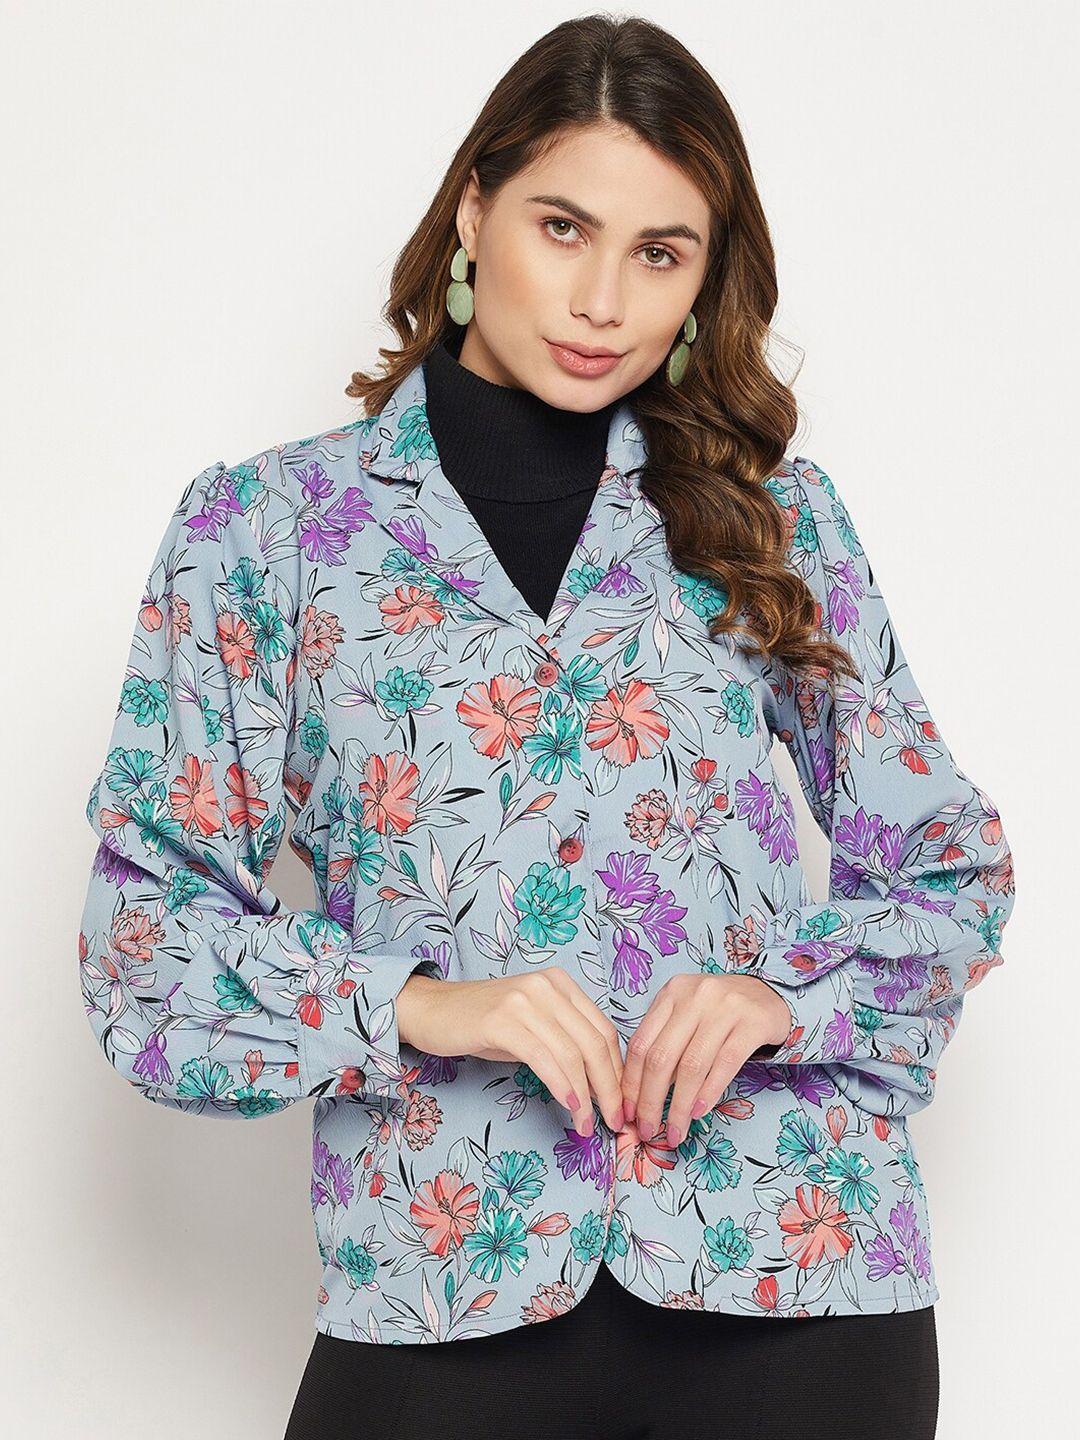 bitterlime long sleeves relaxed floral printed casual shirt